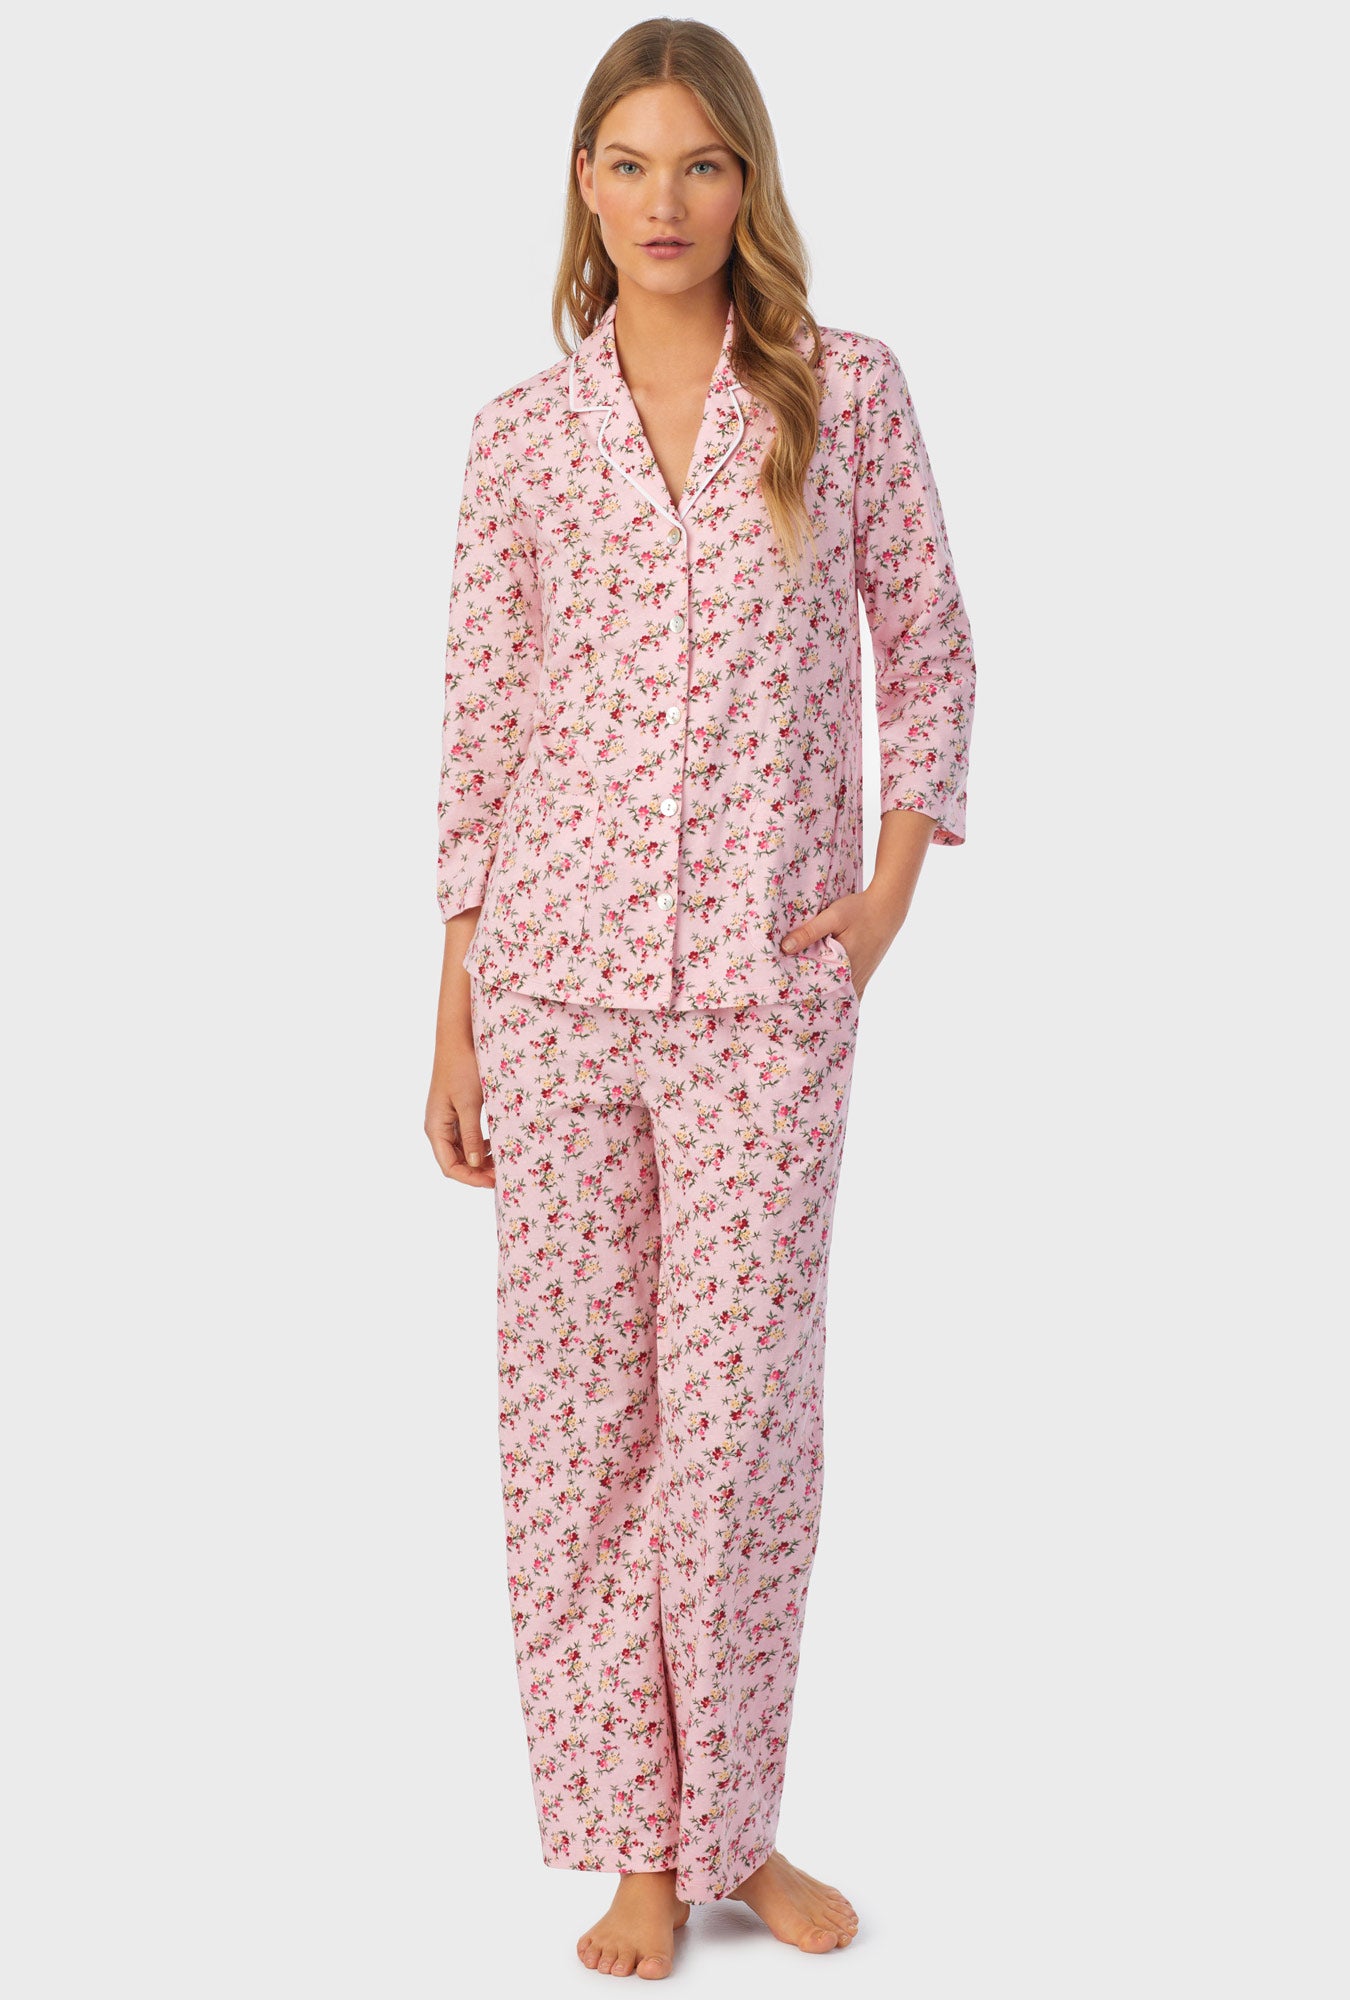 A lady wearing long sleeve pajama set with wild blooms print.